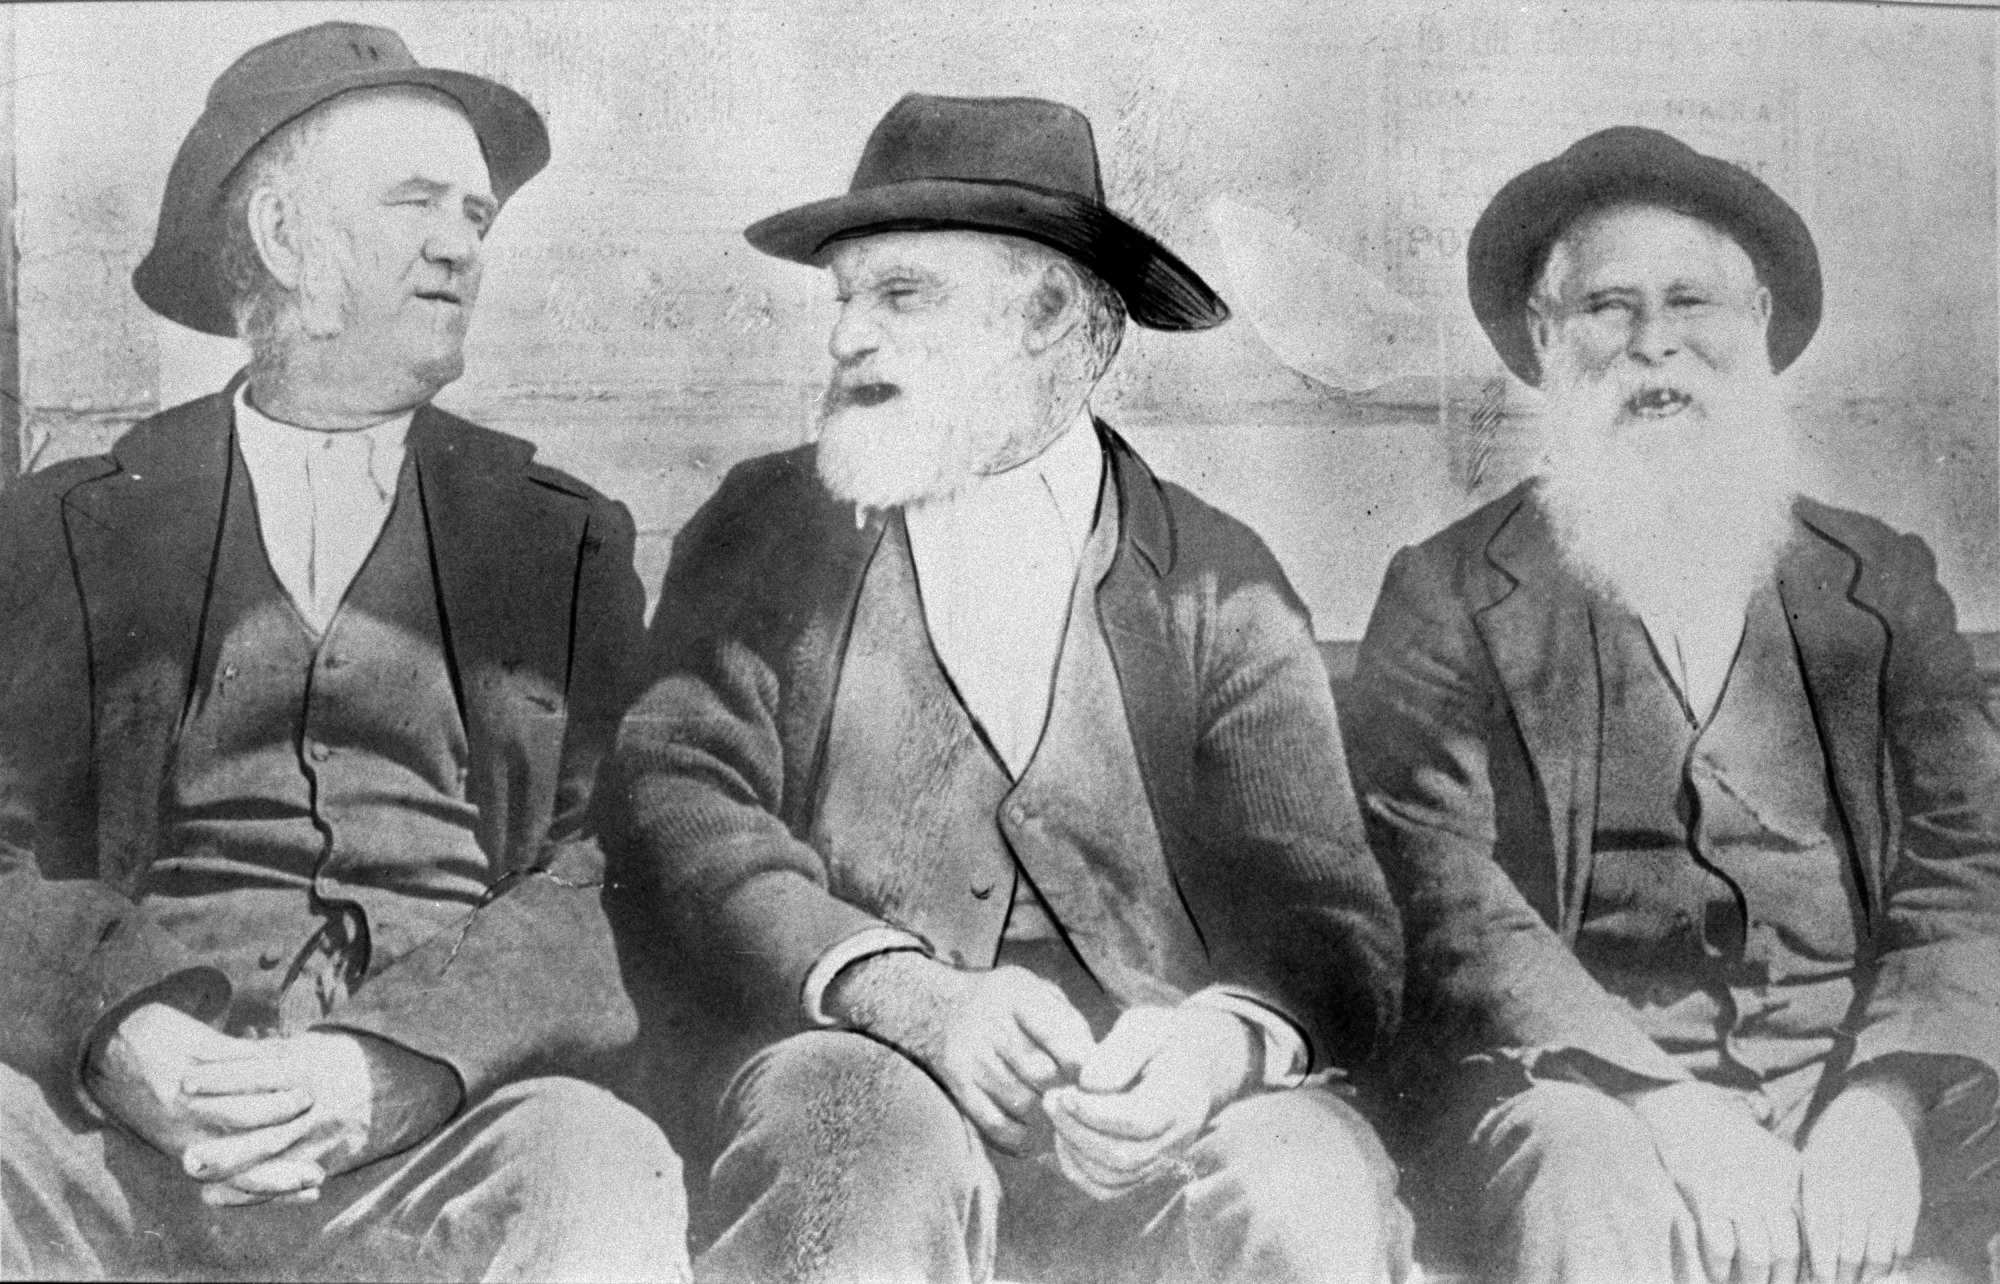 <p>Former convicts Tom ‘the dealer’ (of skins and hides), Davey Evans and Paddy Paternoster, 1898</p>
